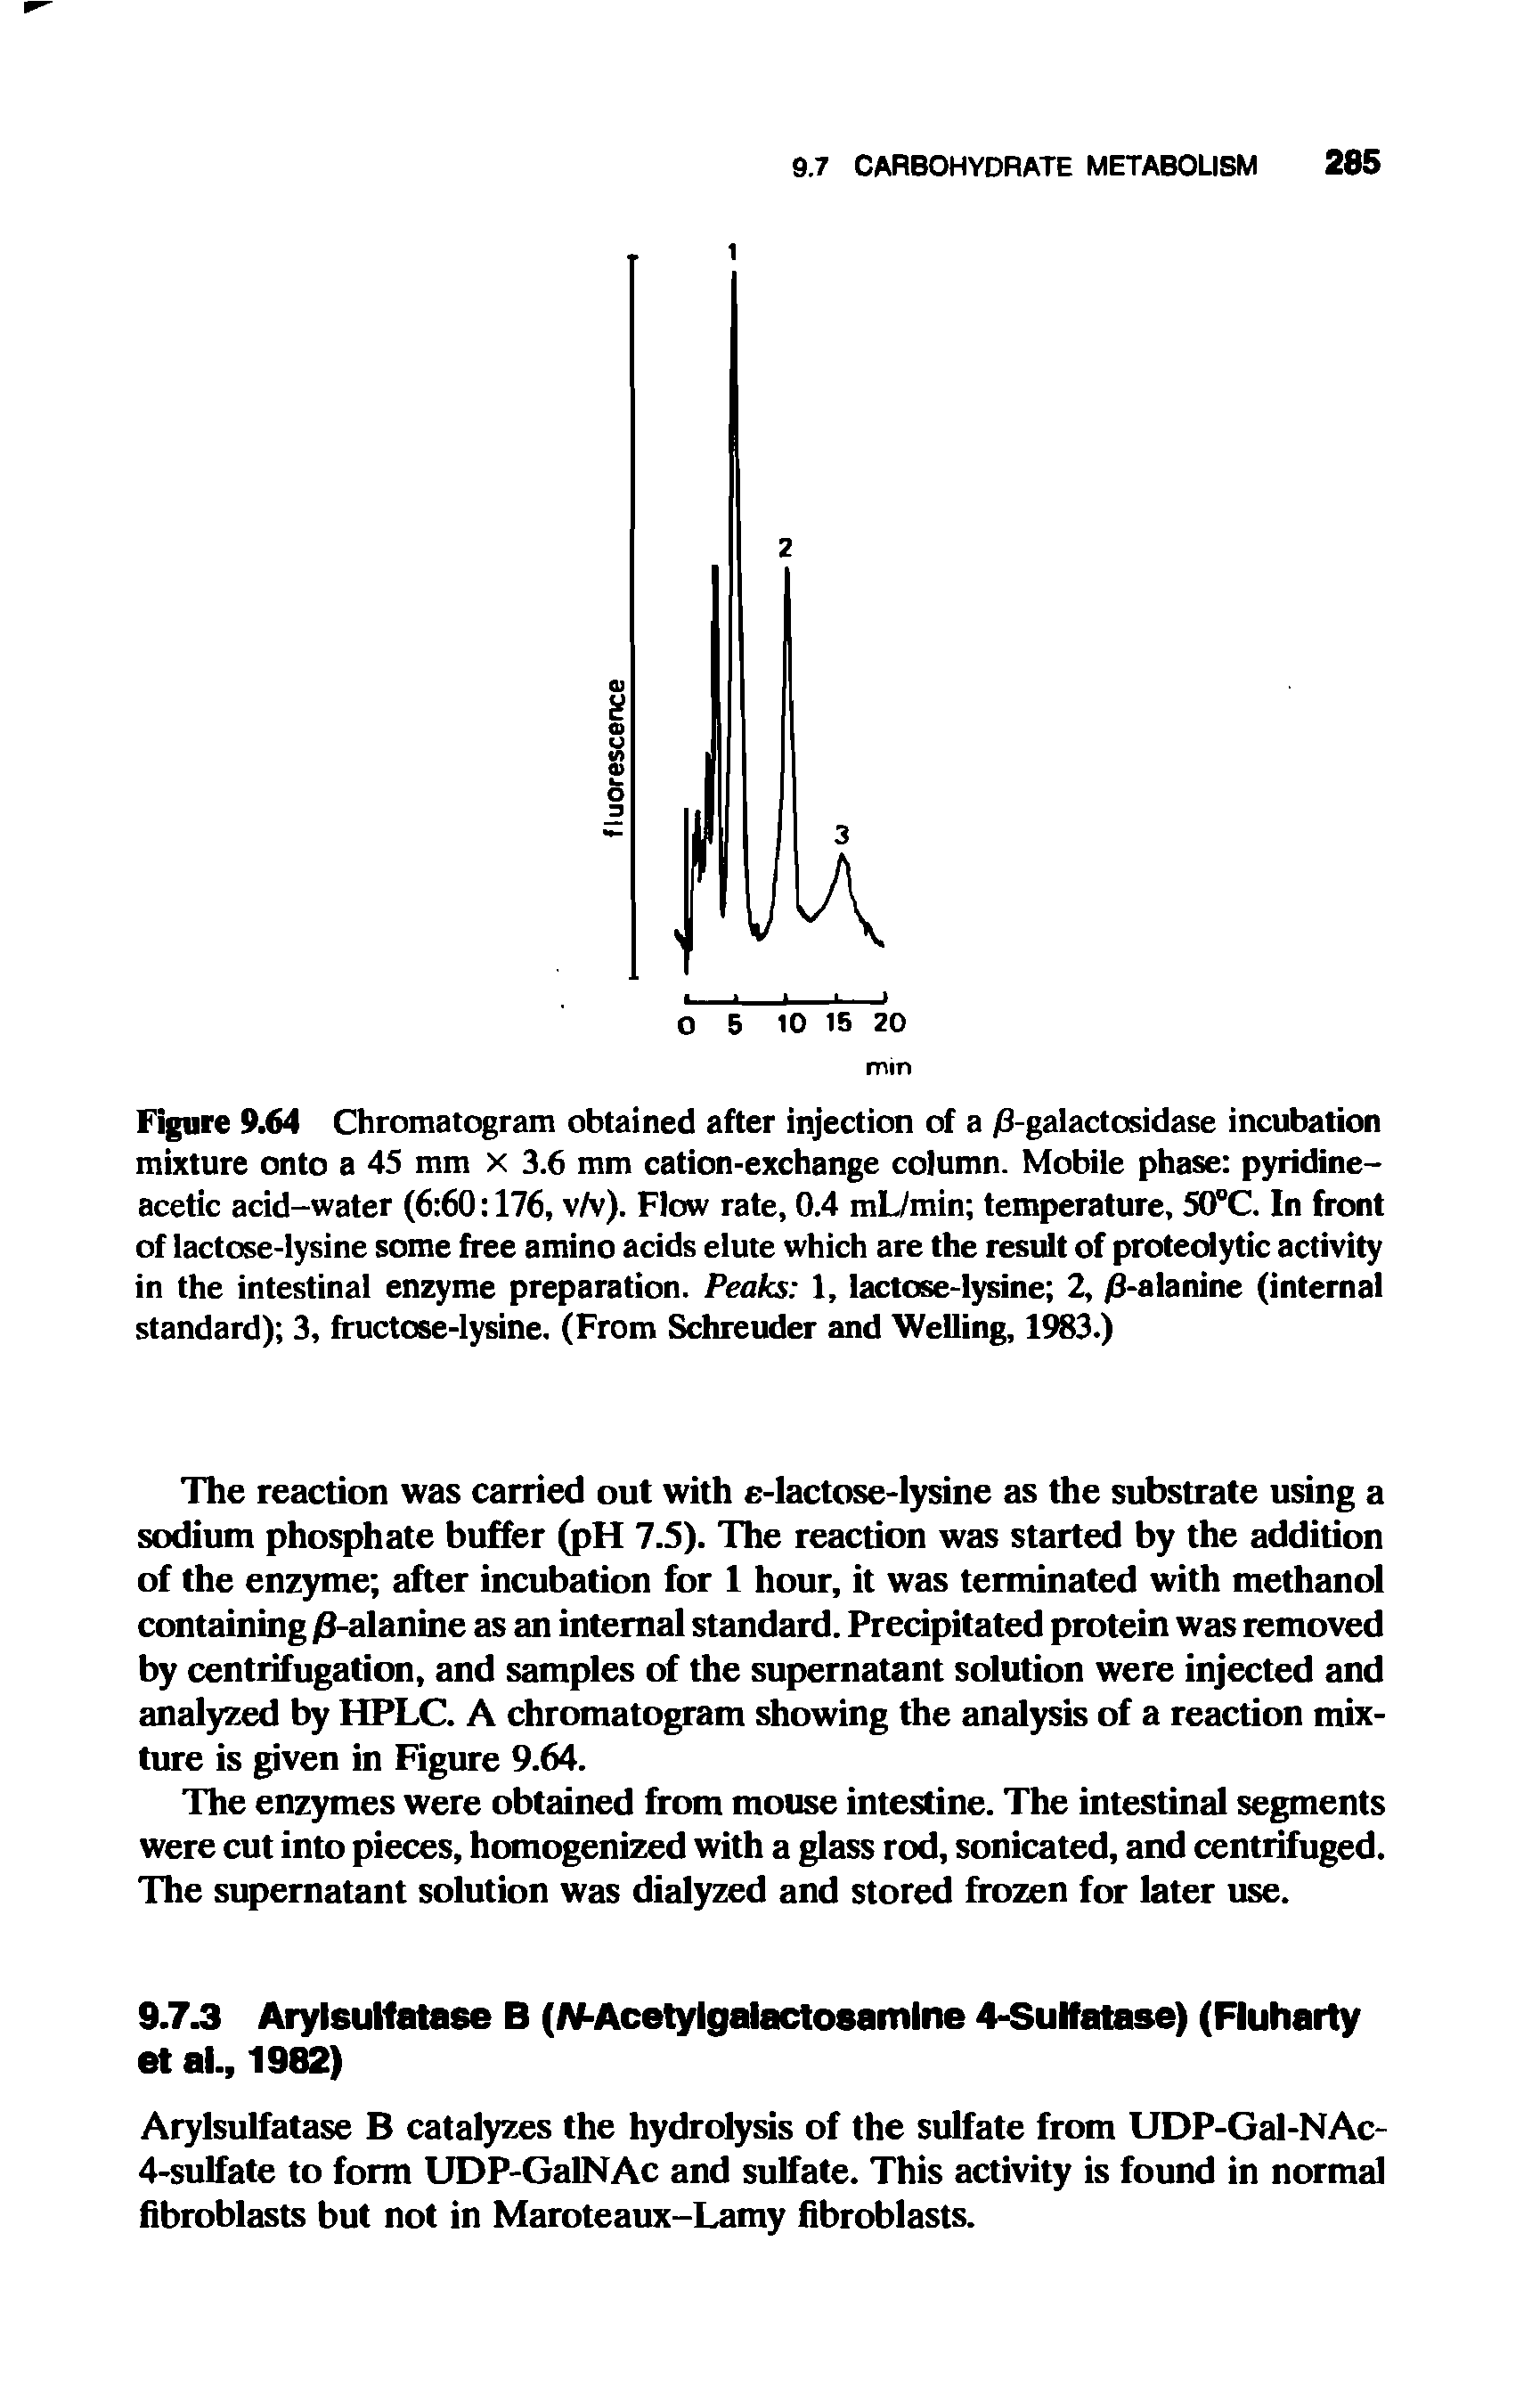 Figure 9.64 Chromatogram obtained after injection of a yQ-galactosidase incubation mixture onto a 45 mm x 3.6 mm cation-exchange column. Mobile phase pyridine-acetic acid-water (6 60 176, v/v). Flow rate, 0.4 mL/min temperature, 50°C. In front of lactose-lysine some free amino acids elute which are the result of proteolytic activity in the intestinal enzyme preparation. Peaks 1, lactose-lysine 2, /8-alanine (internal standard) 3, fructose-lysine. (From Schreuder and Welling, 1983.)...